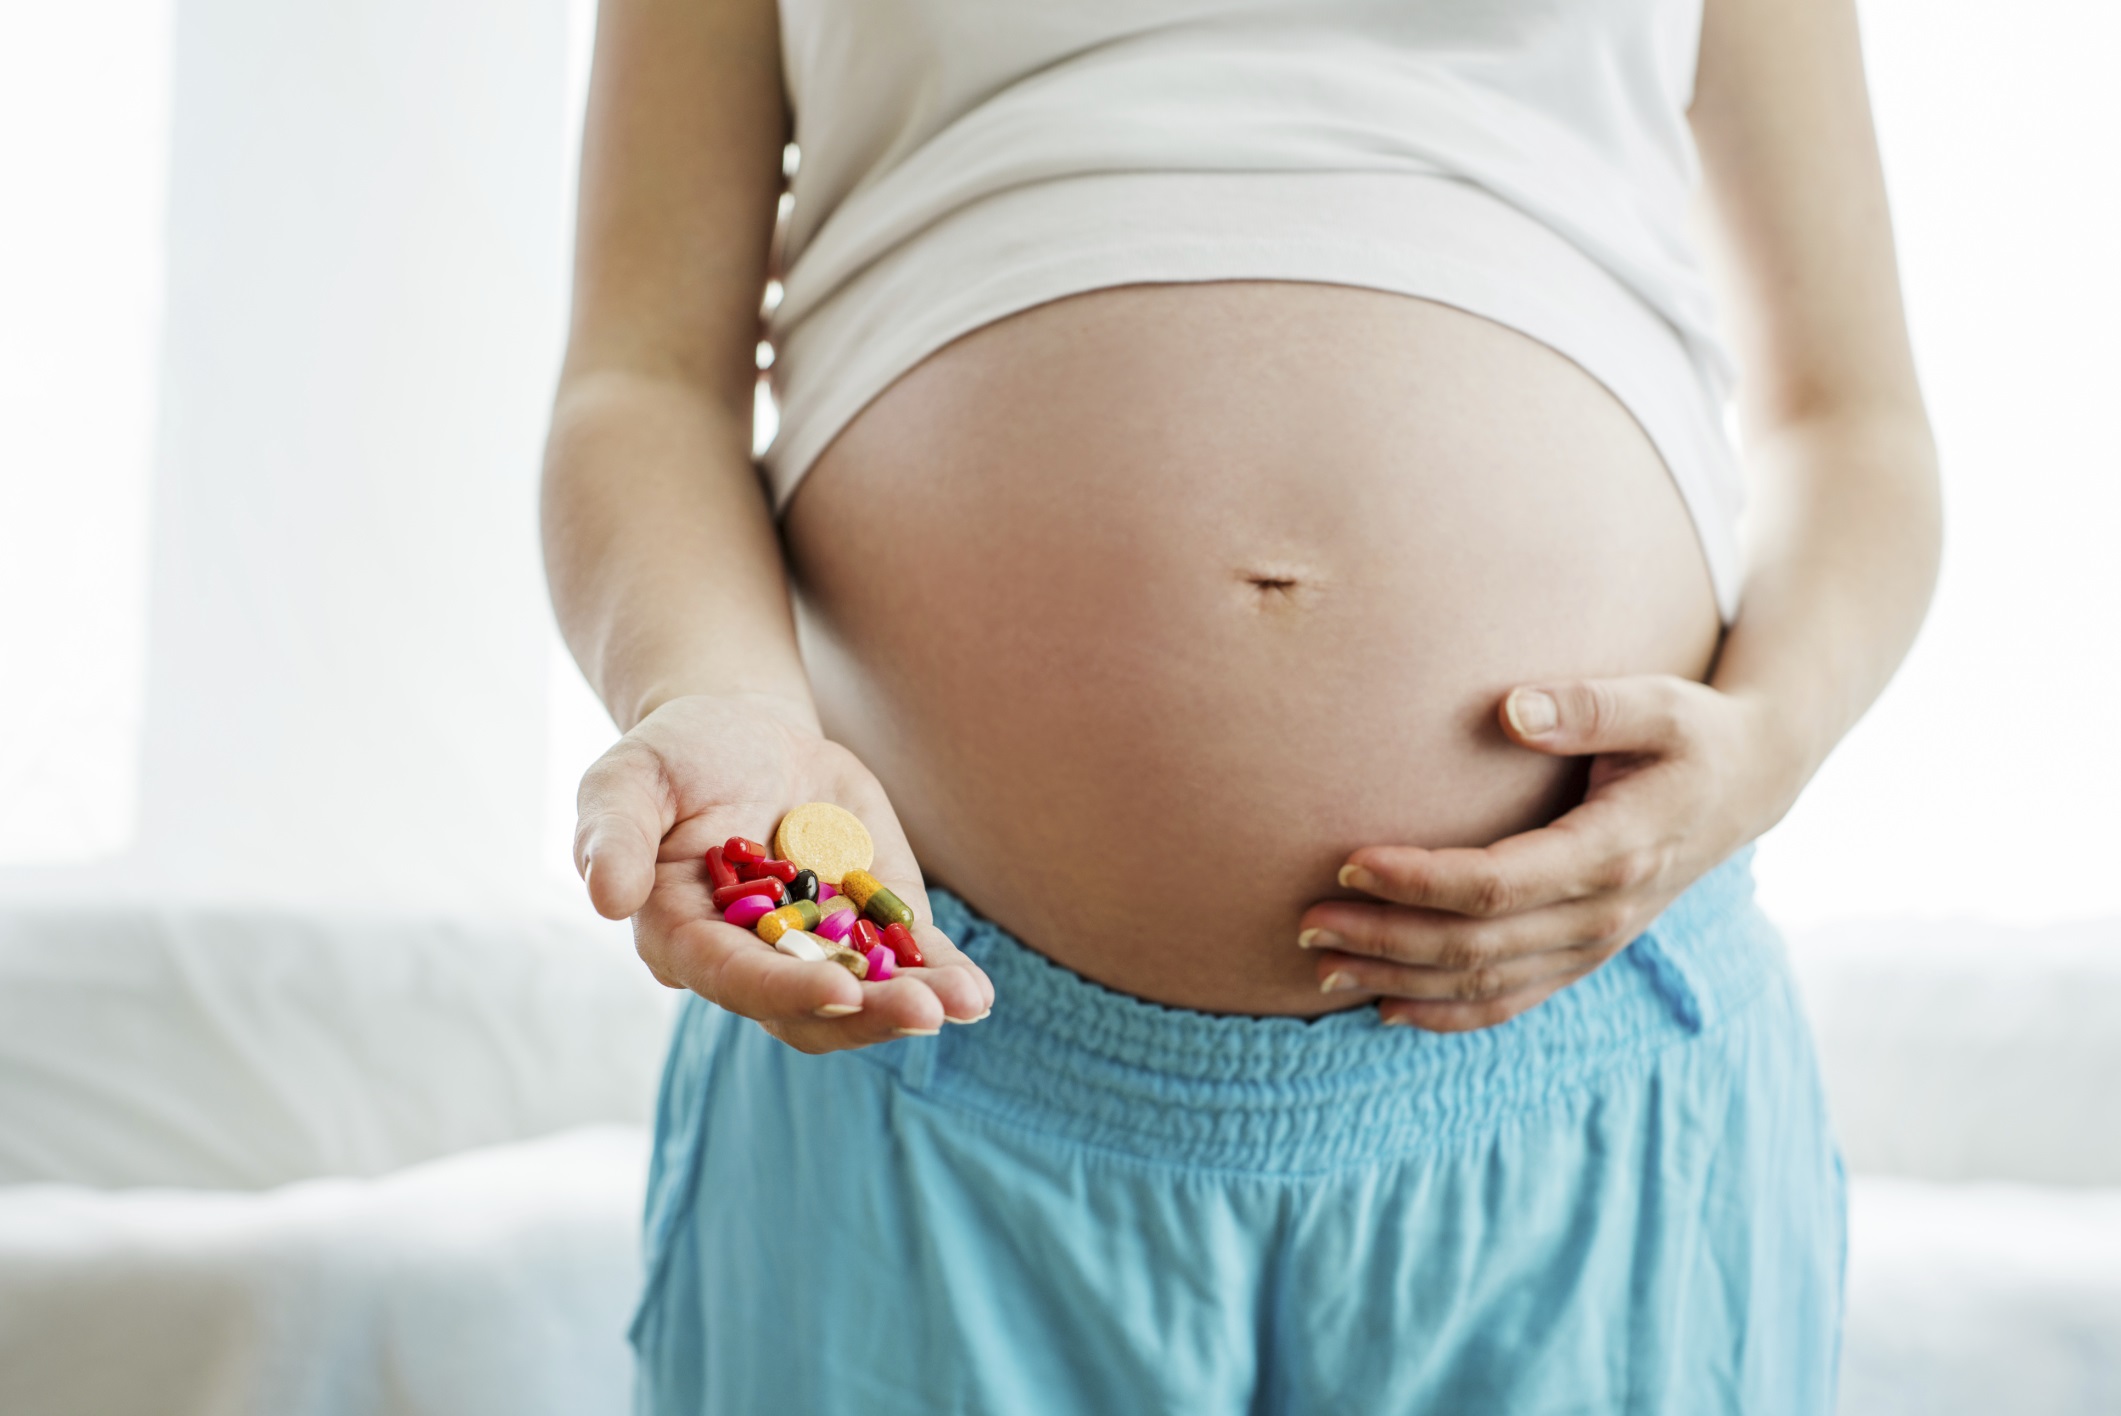 Evaluating the safety of magnesium glycinate supplements in pregnant women